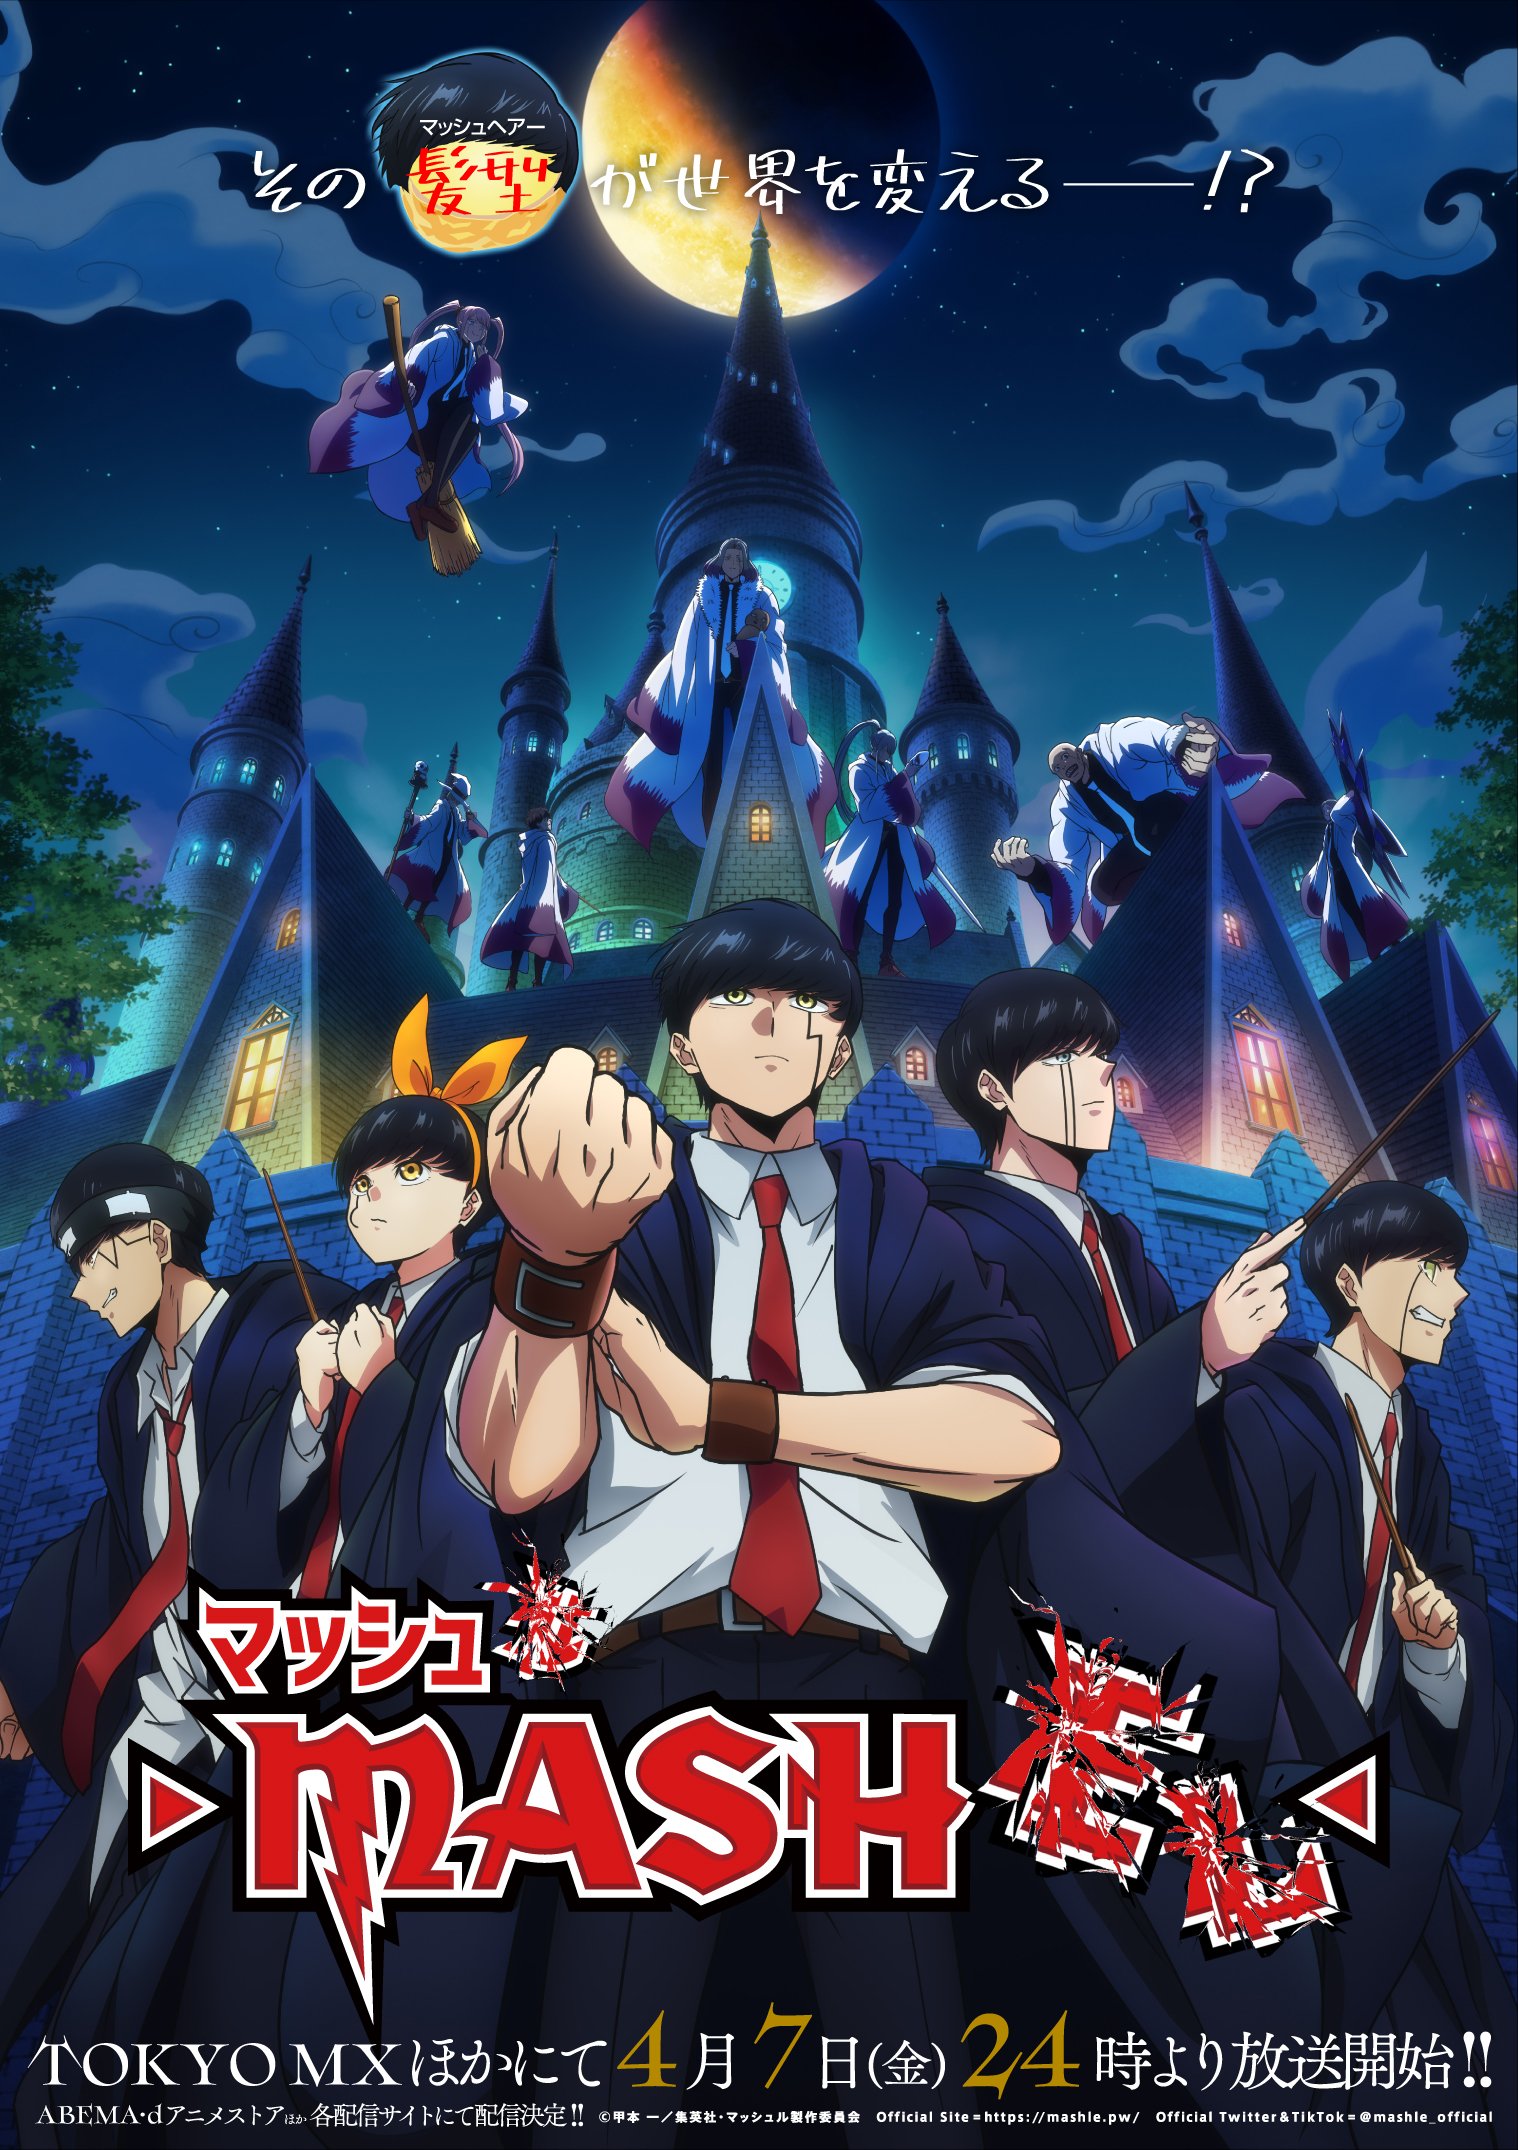 Mashle: Magic And Muscles - Saison 1 en streaming VOSTFR